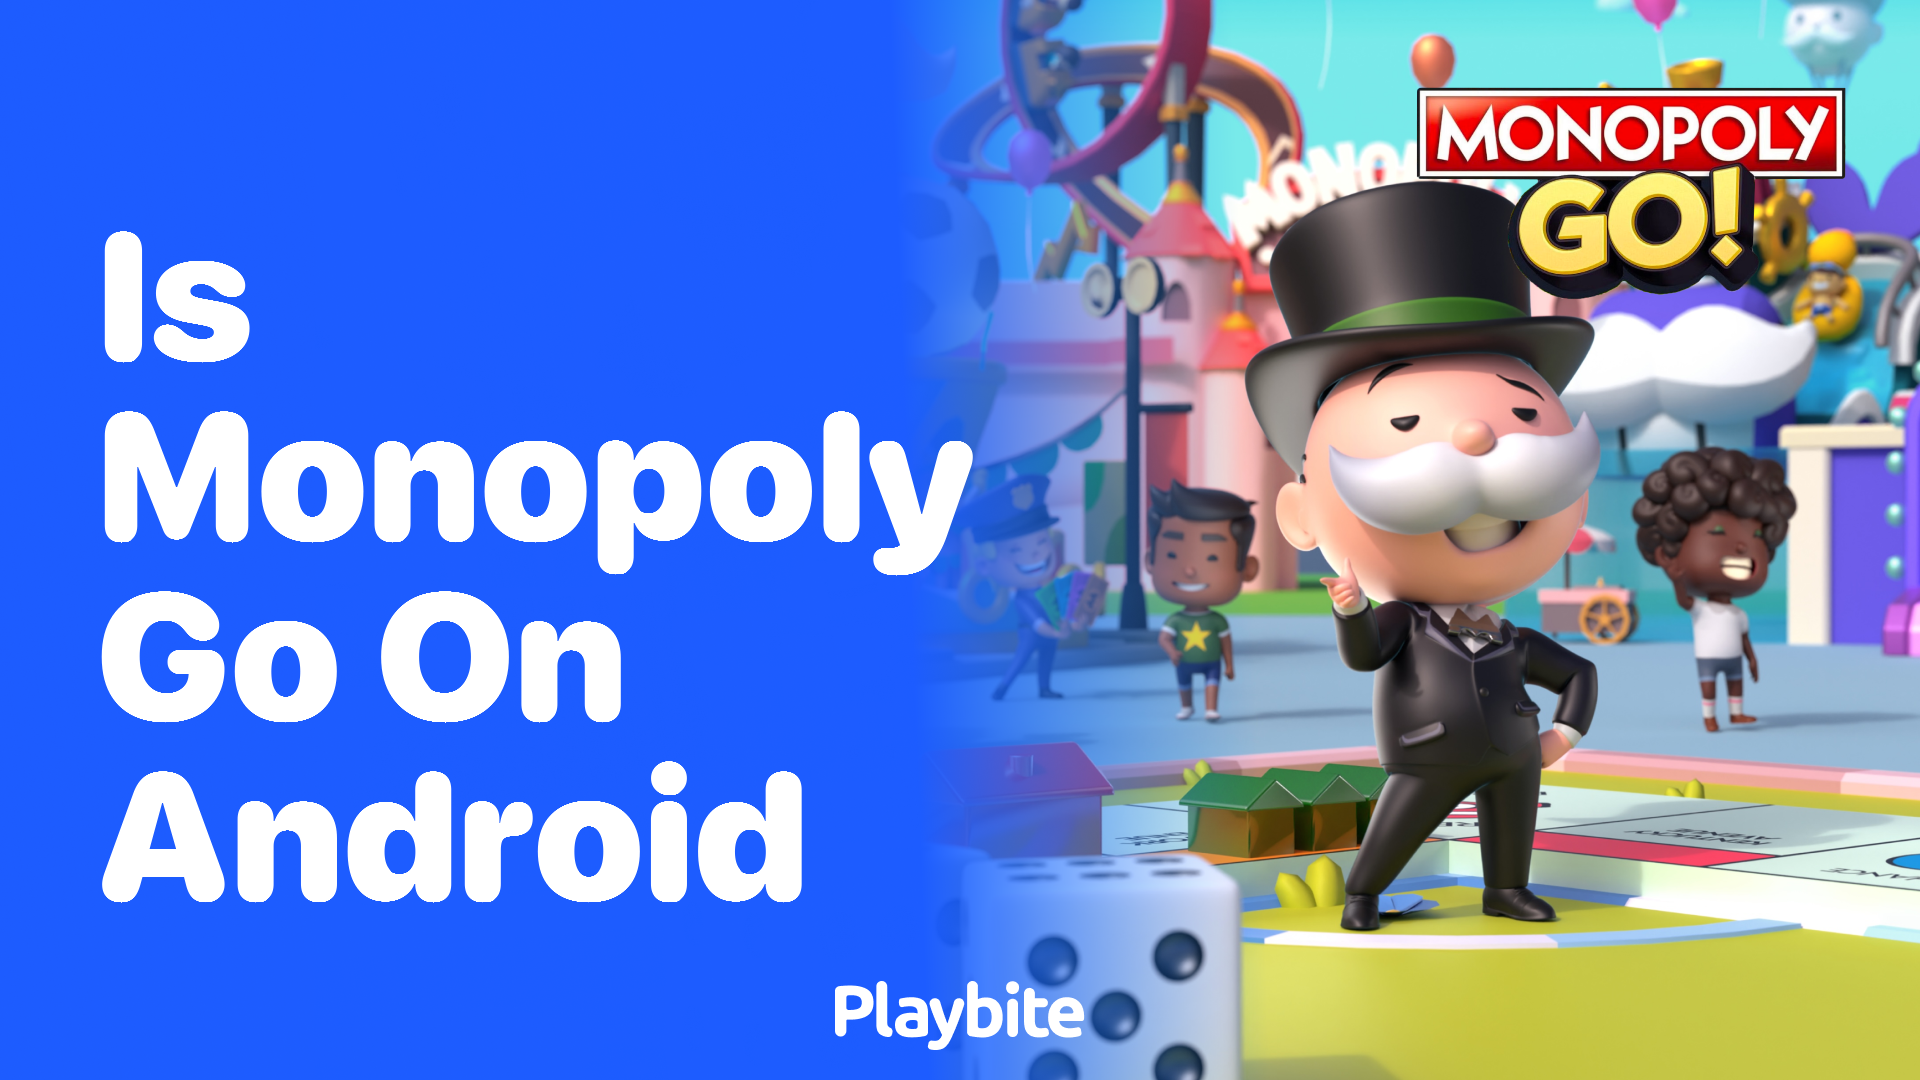 Is Monopoly Go Available on Android Devices?